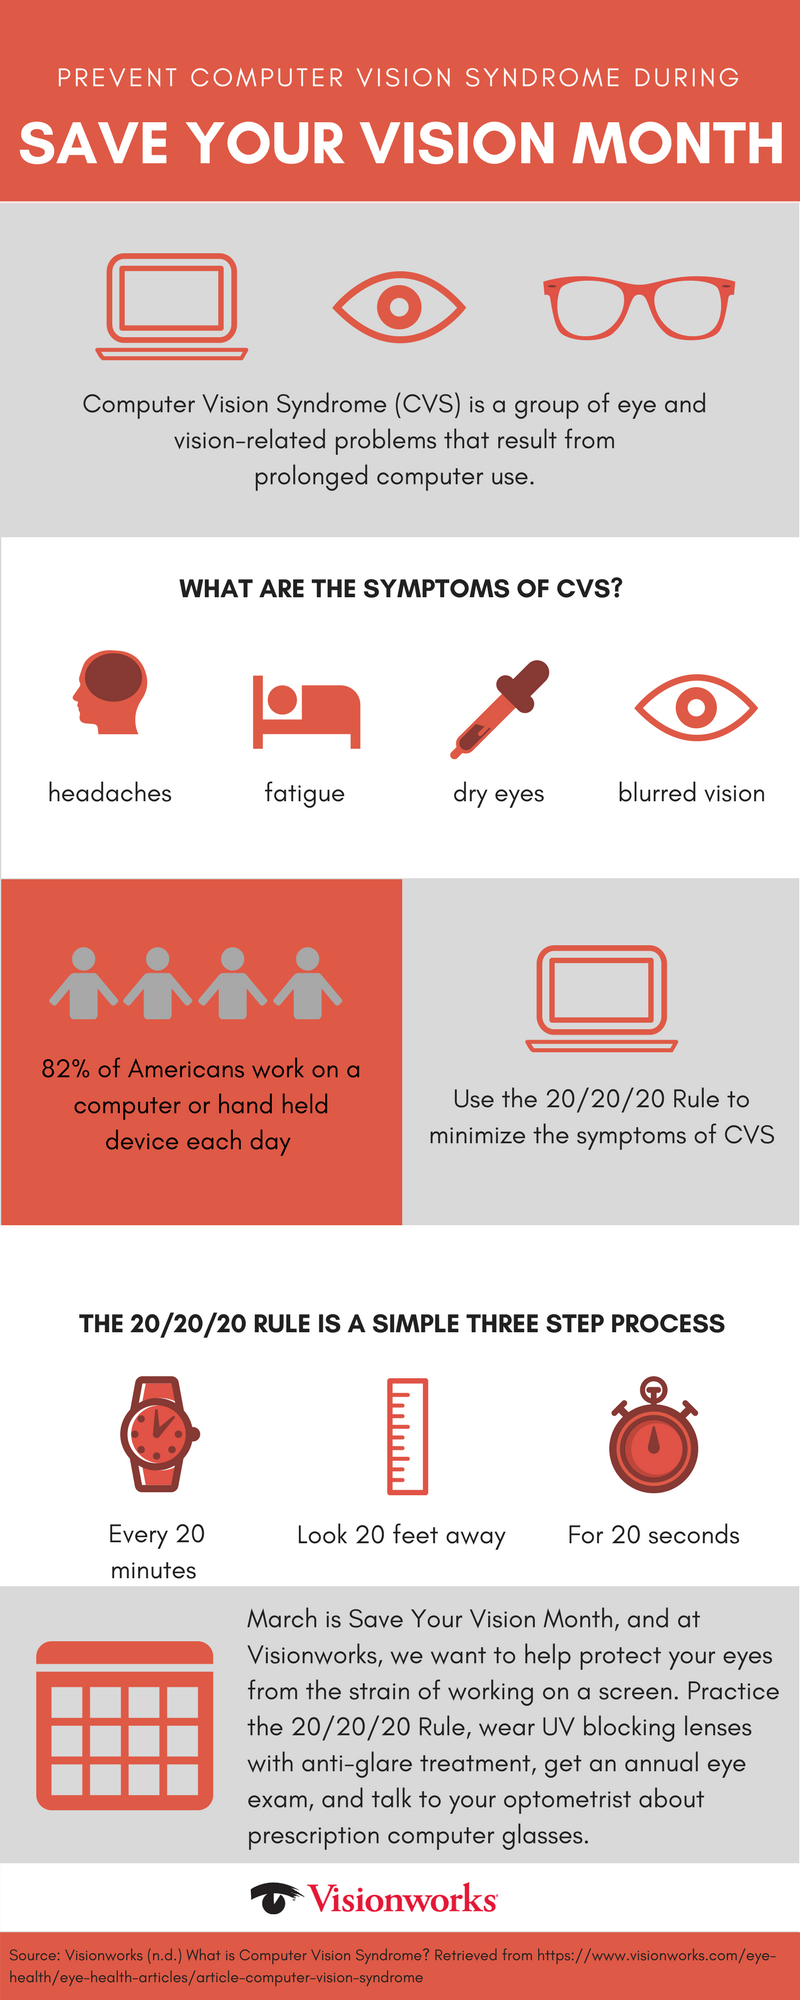 Computer Vision Syndrome Save Your Vision Month Visual.ly